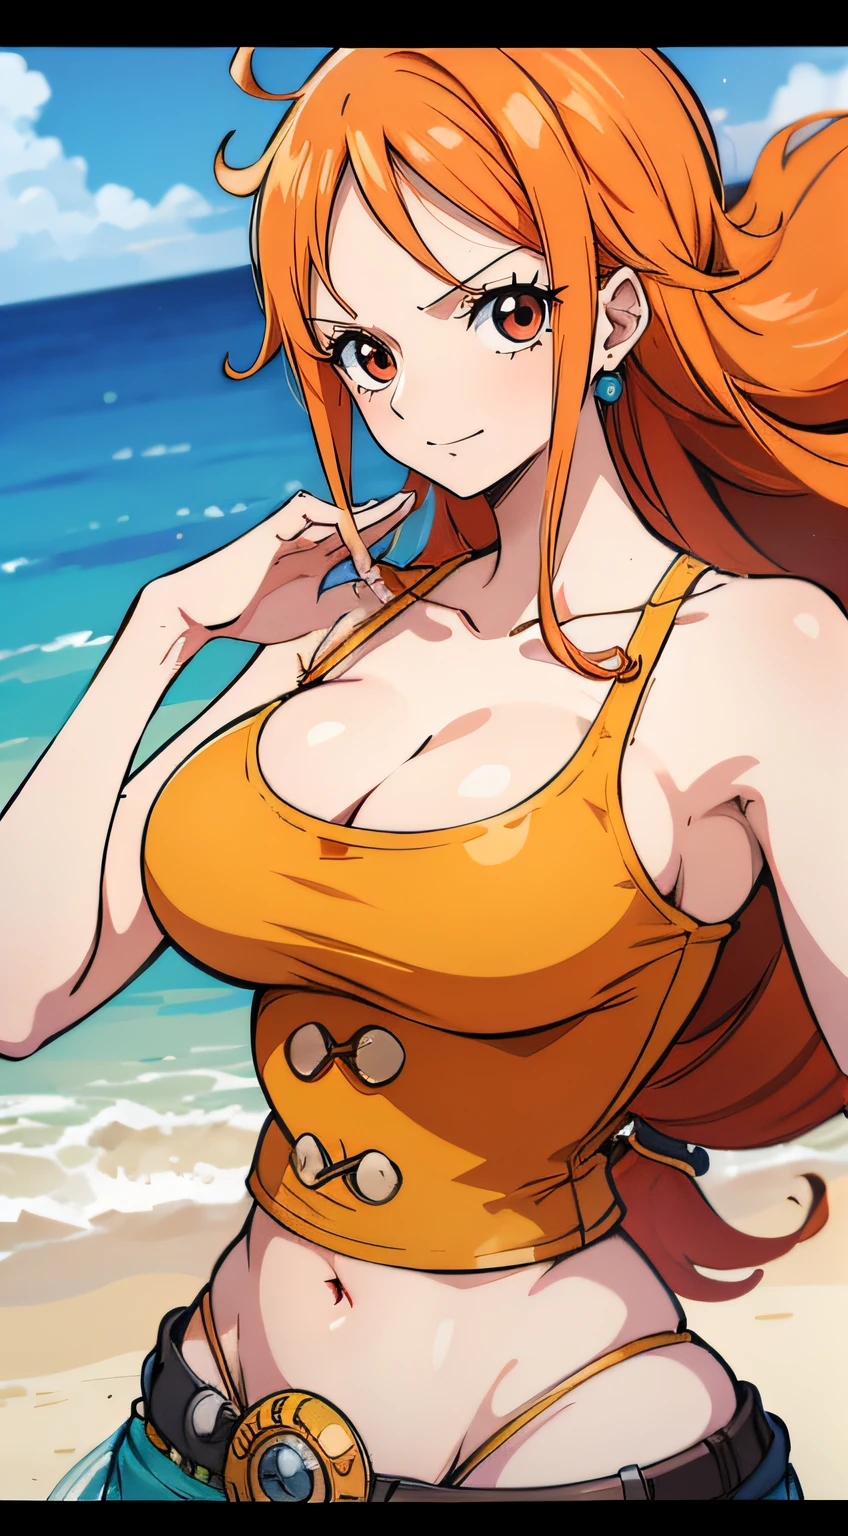 Generate a realistic anime-style image of Nami from One Piece. Capture her distinctive look with orange hair, a shirt, and a cheerful expression. Make sure the picture reflects your adventurous and confident personality as shown in the anime.., Whole body, Wide plan , NSFW, Curvy athletic body, Island background,bra top, Skirt, orange eyes, orange eyes, armpits, stomach, breasts